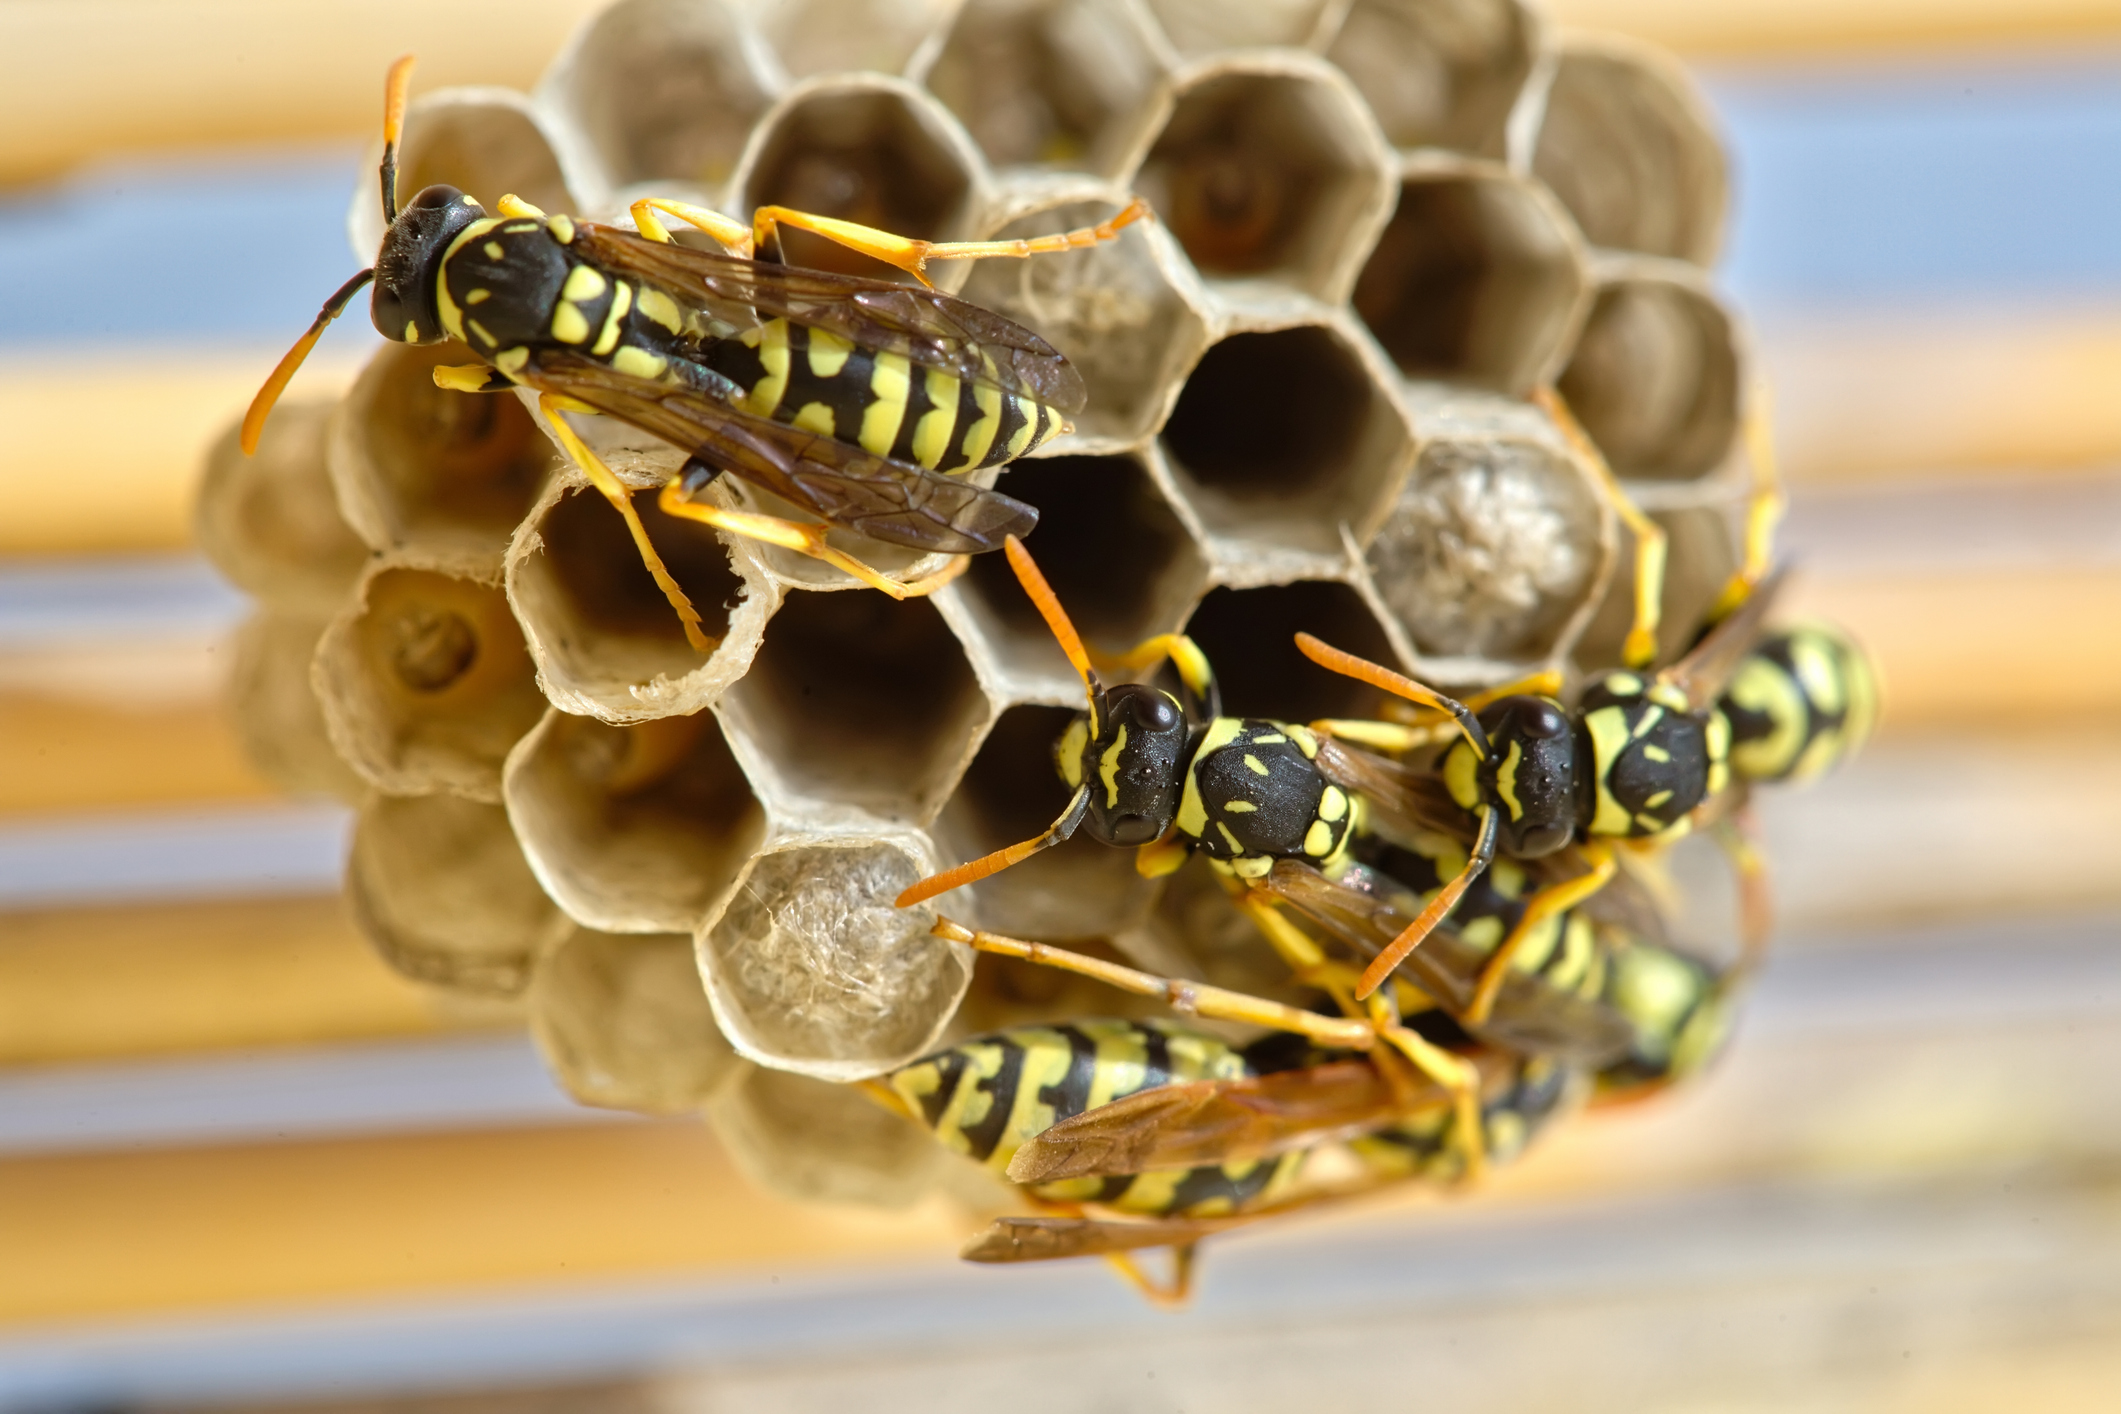 Several wasps building a nest to lay their eggs. (Photo: iStock - digicomphoto)